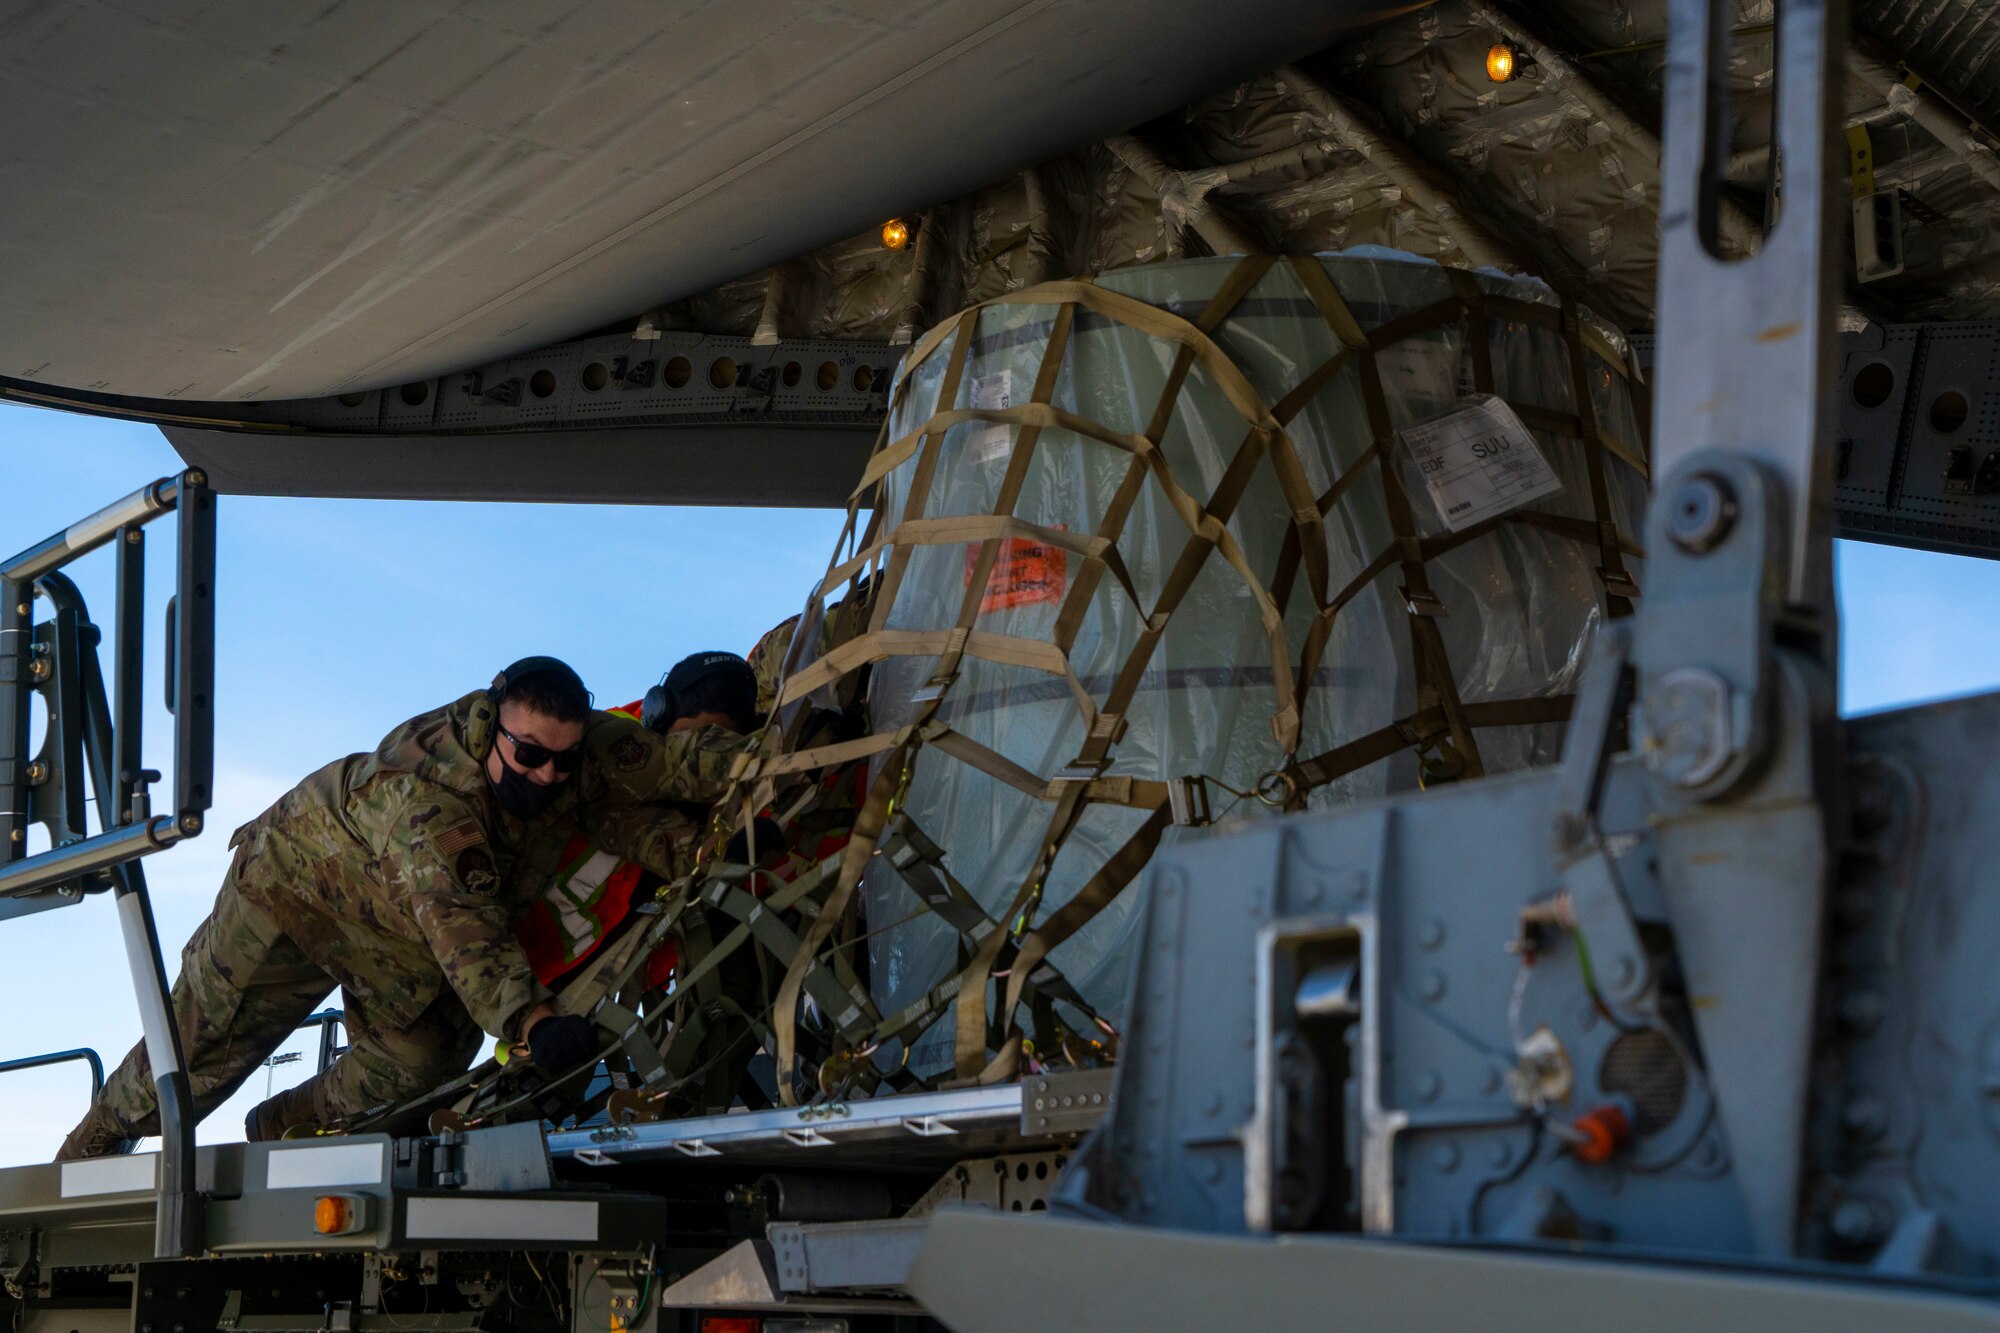 Airmen assigned to the 732d Air Mobility Squadron load cargo onto a C-17 Globemaster III assigned to Joint Base Lewis-McChord, Washington, on the flightline at Joint Base Elmendorf-Richardson, Alaska, May 1, 2021, in support of Northern Edge 2021. Approximately 15,000 U.S. service members are participating in a joint training exercise hosted by U.S. Pacific Air Forces May 3-14, 2021, on and above the Joint Pacific Alaska Range Complex, the Gulf of Alaska, and temporary maritime activities area. NE21 is one in a series of U.S. Indo-Pacific Command exercises designed to sharpen the joint forces’ skills; to practice tactics, techniques, and procedures; to improve command, control and communication relationships; and to develop cooperative plans and programs.